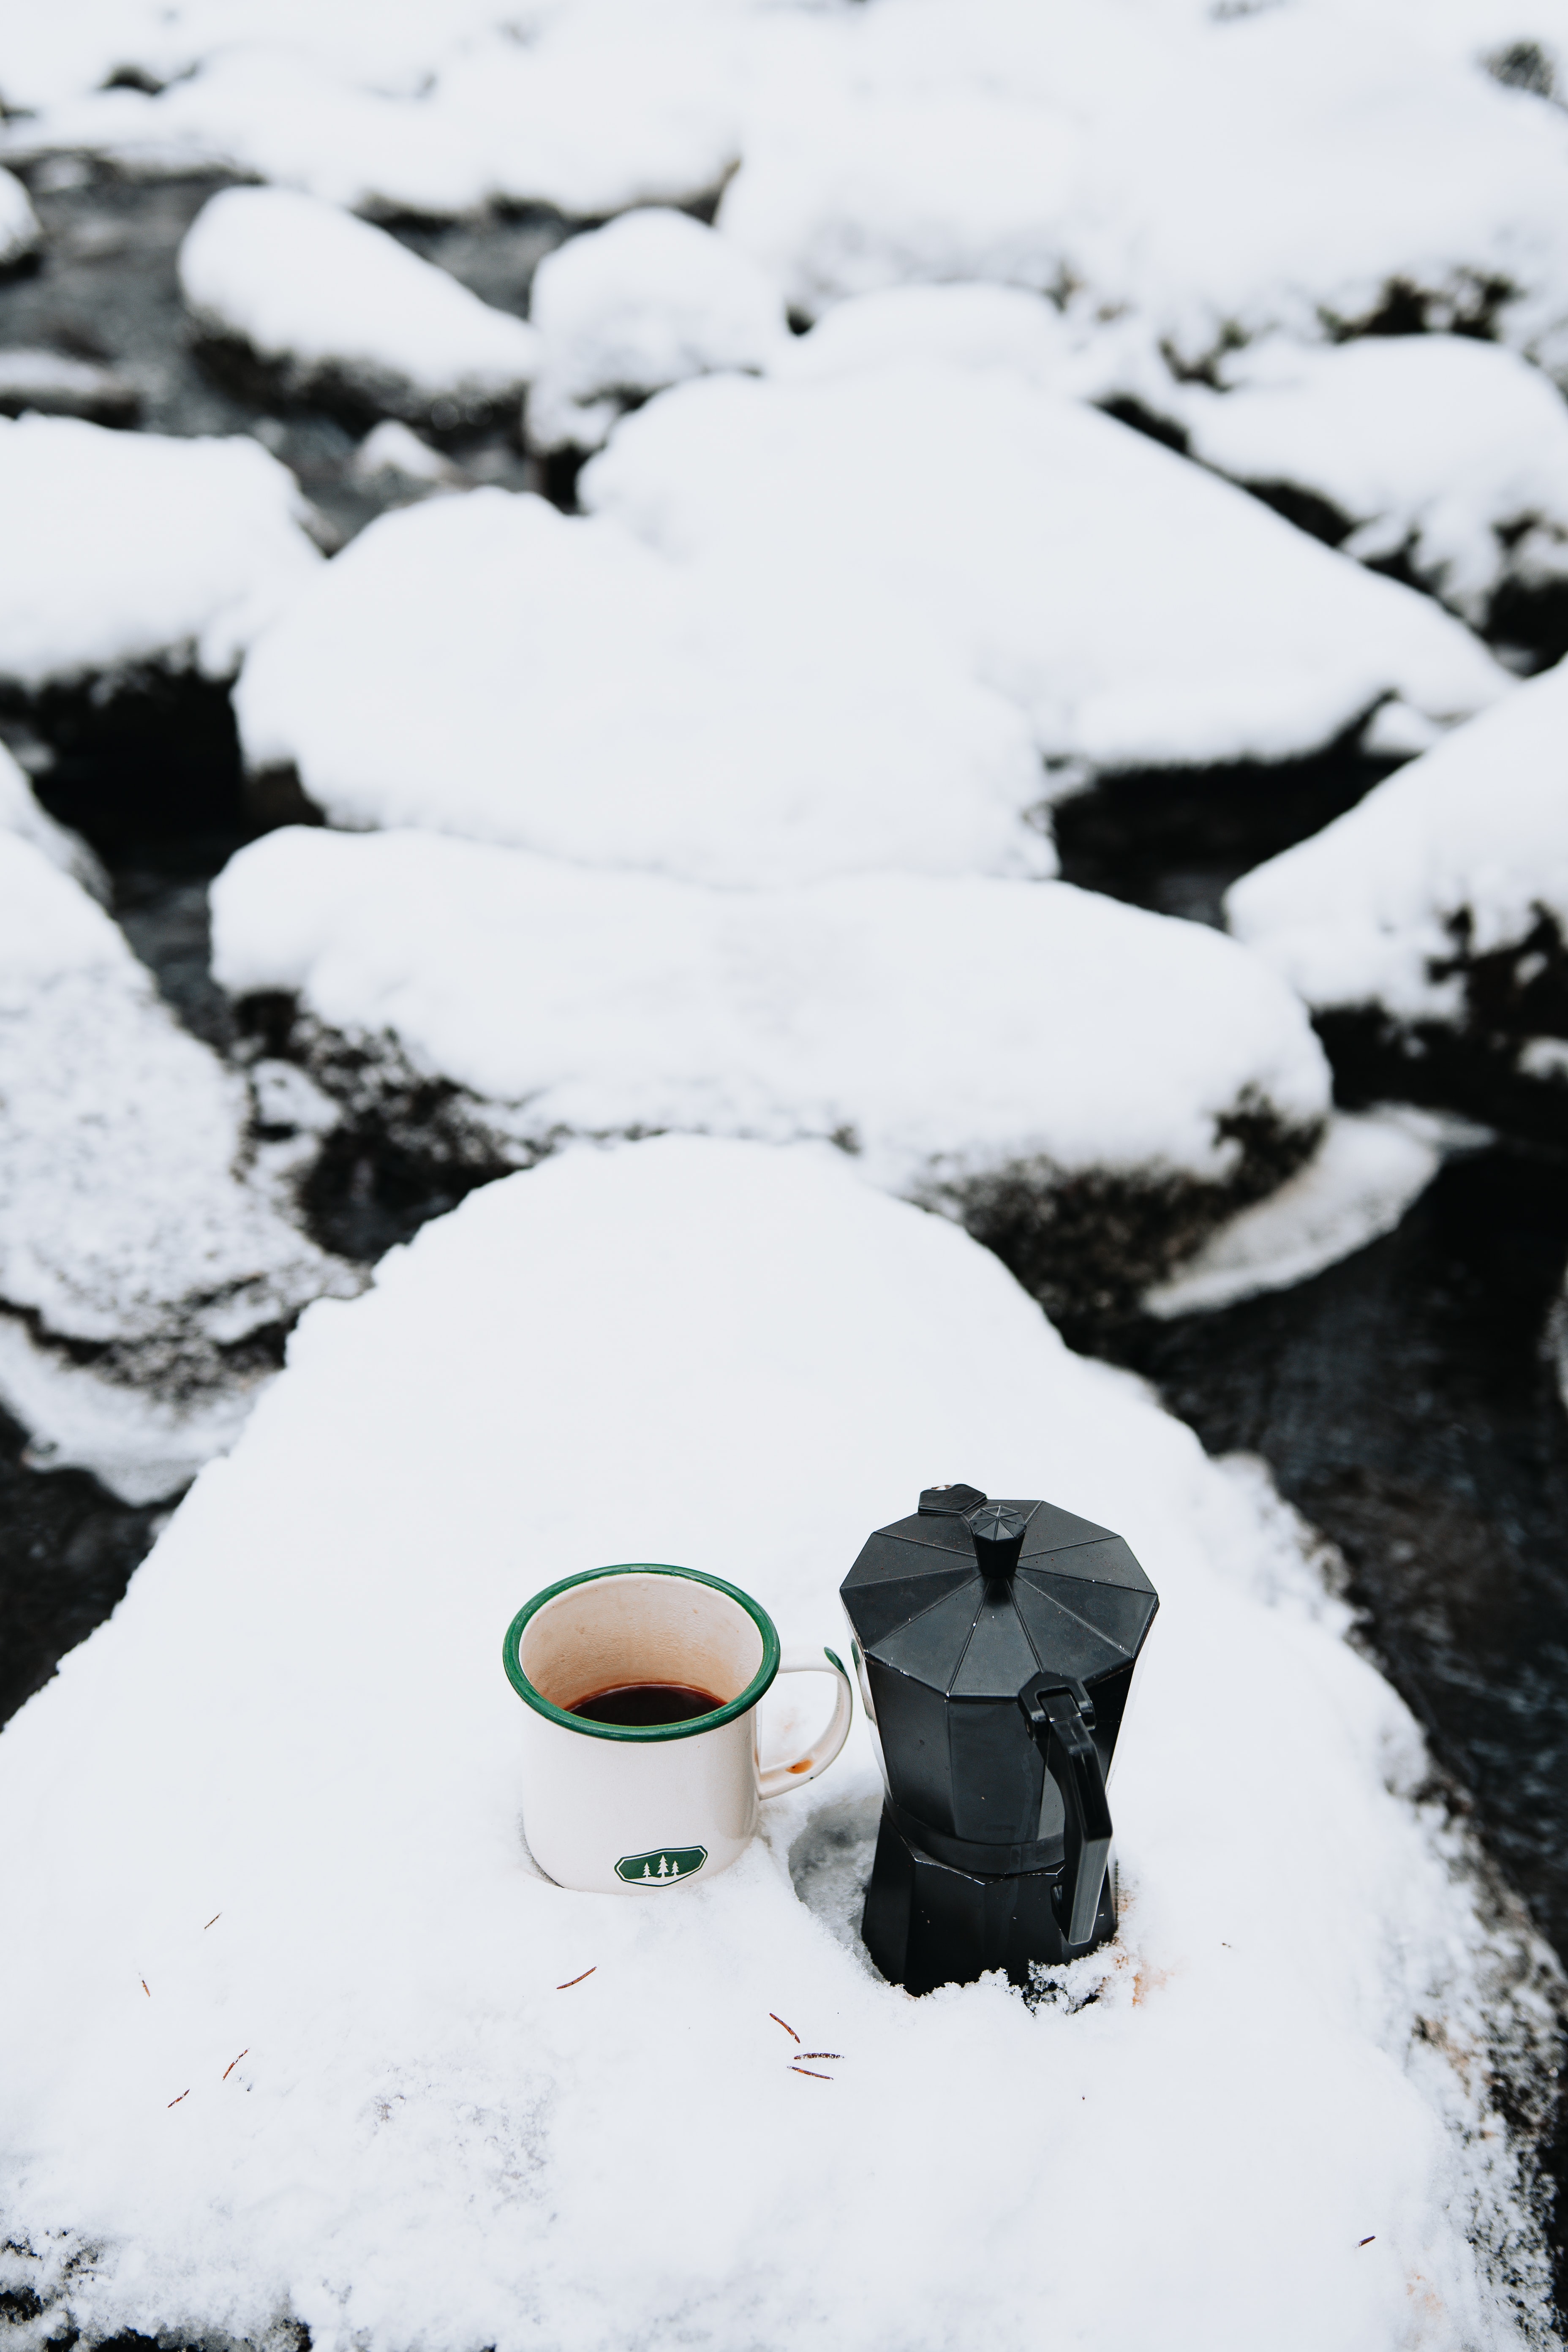 56515 download wallpaper winter, snow, miscellanea, miscellaneous, cup, tea, teapot, kettle, mug screensavers and pictures for free